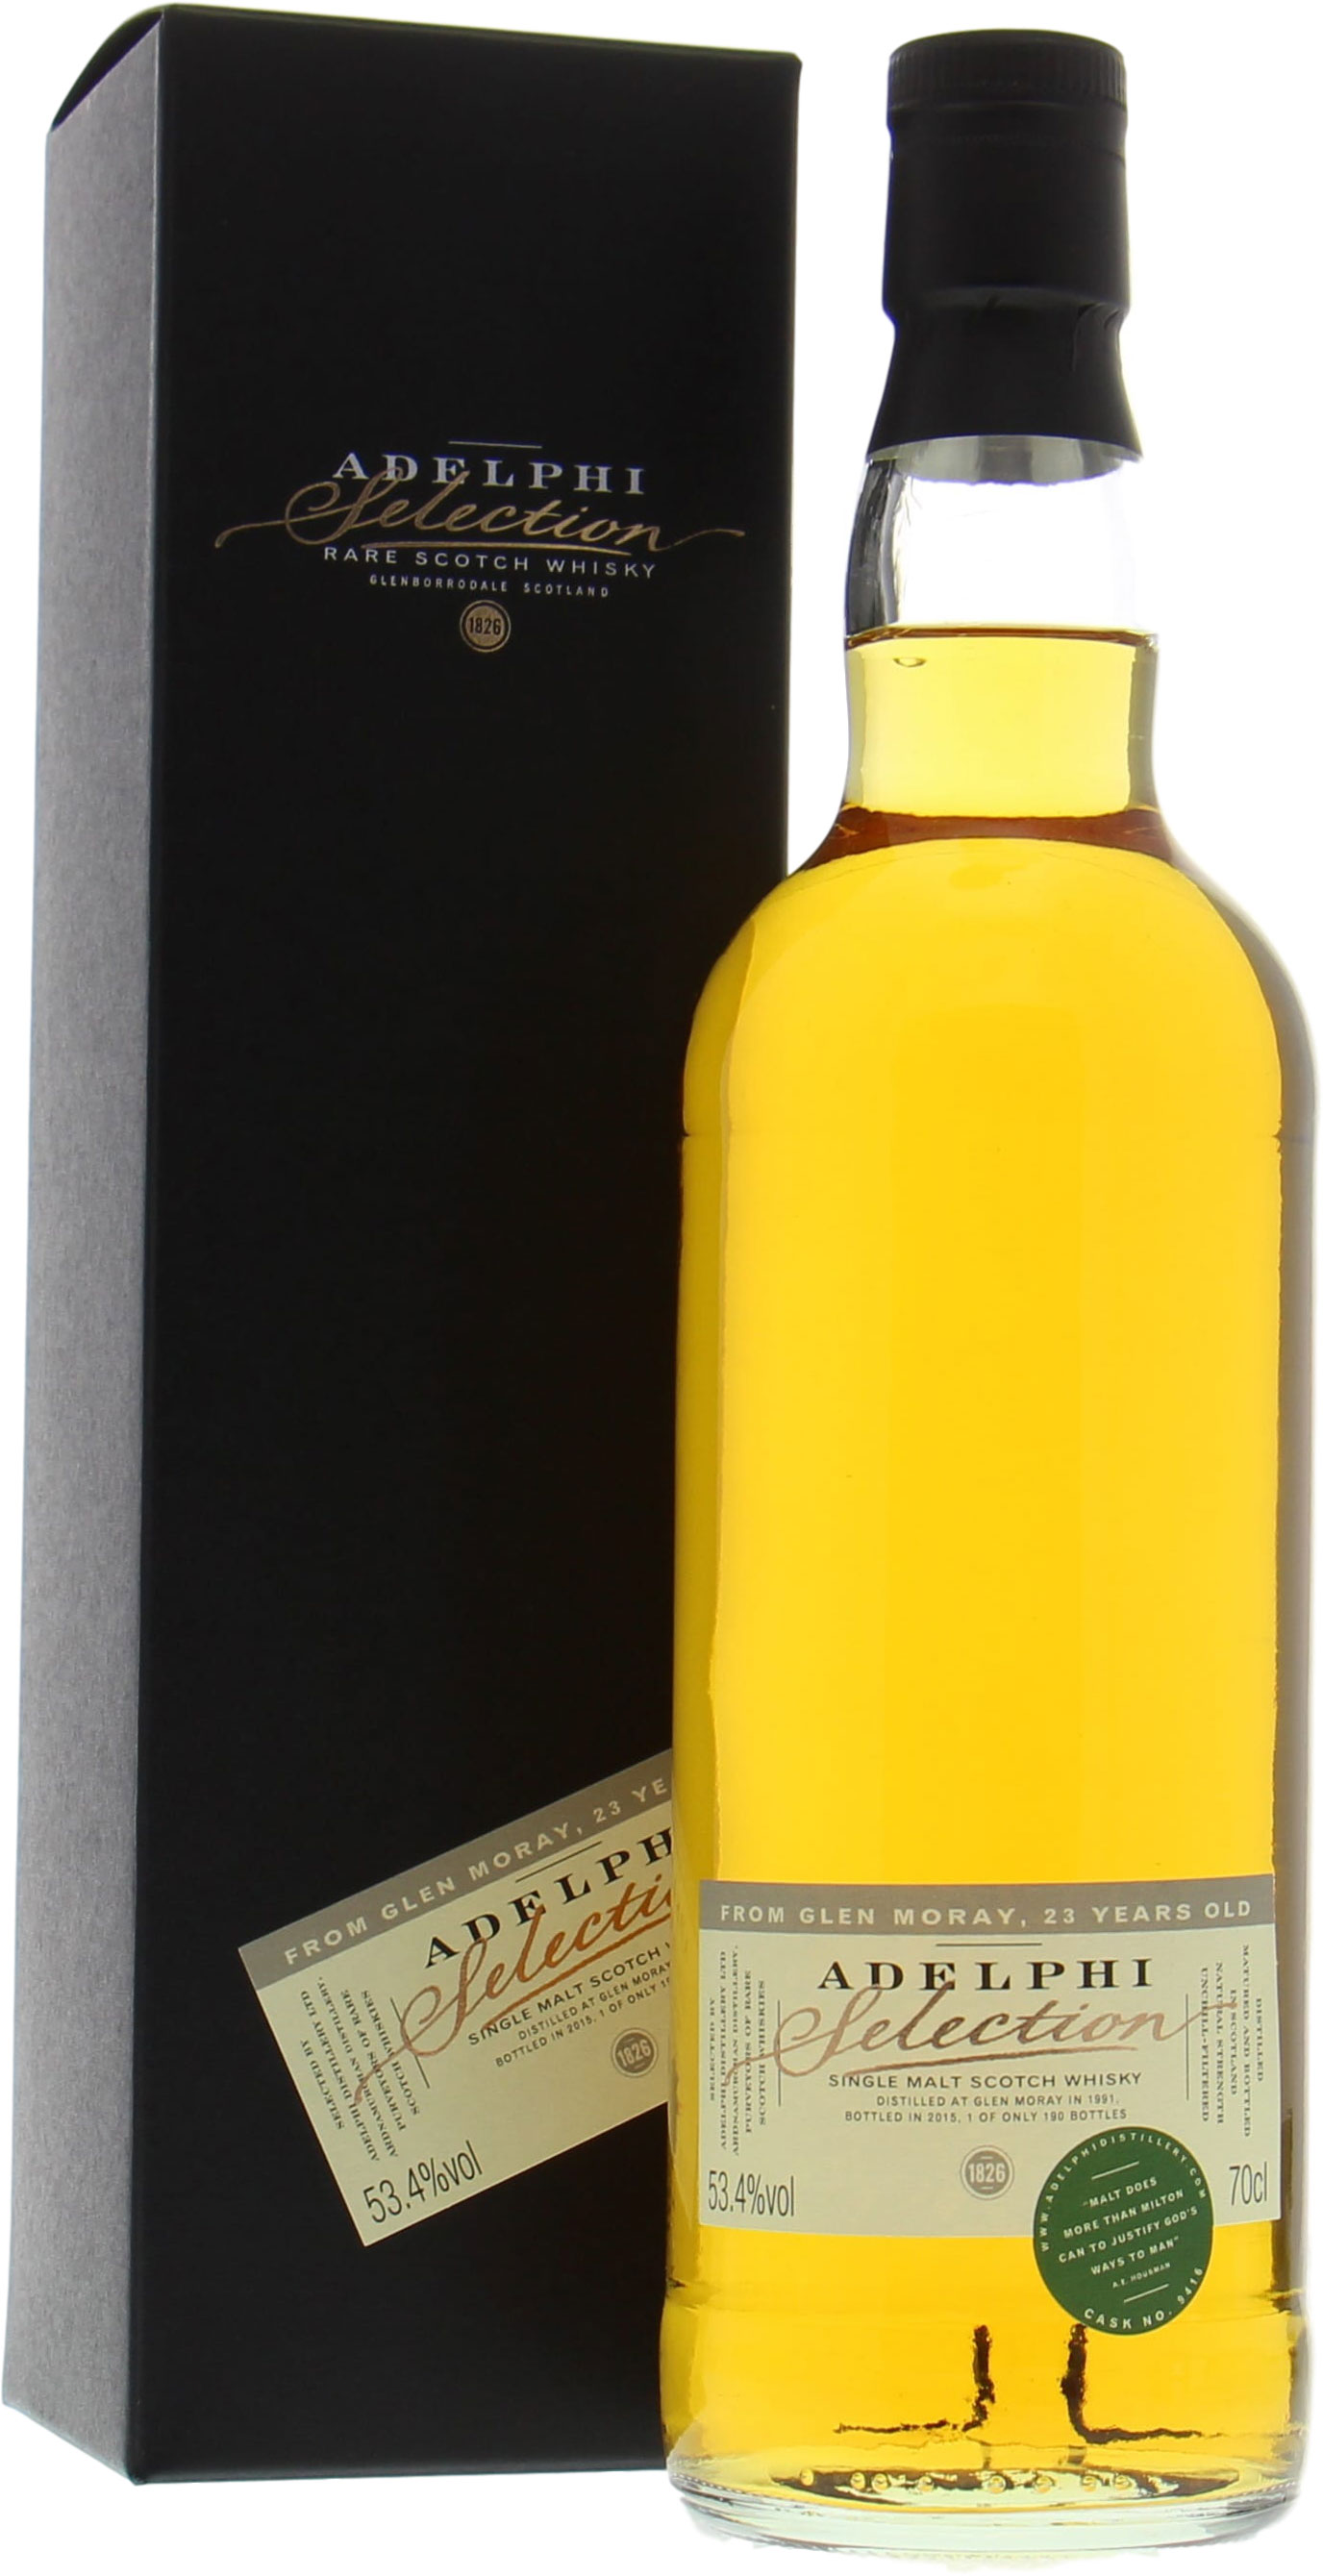 Glen Moray - 23 Years Old Adelphi Selection Cask:9416 53.4% 1991 In Original Container